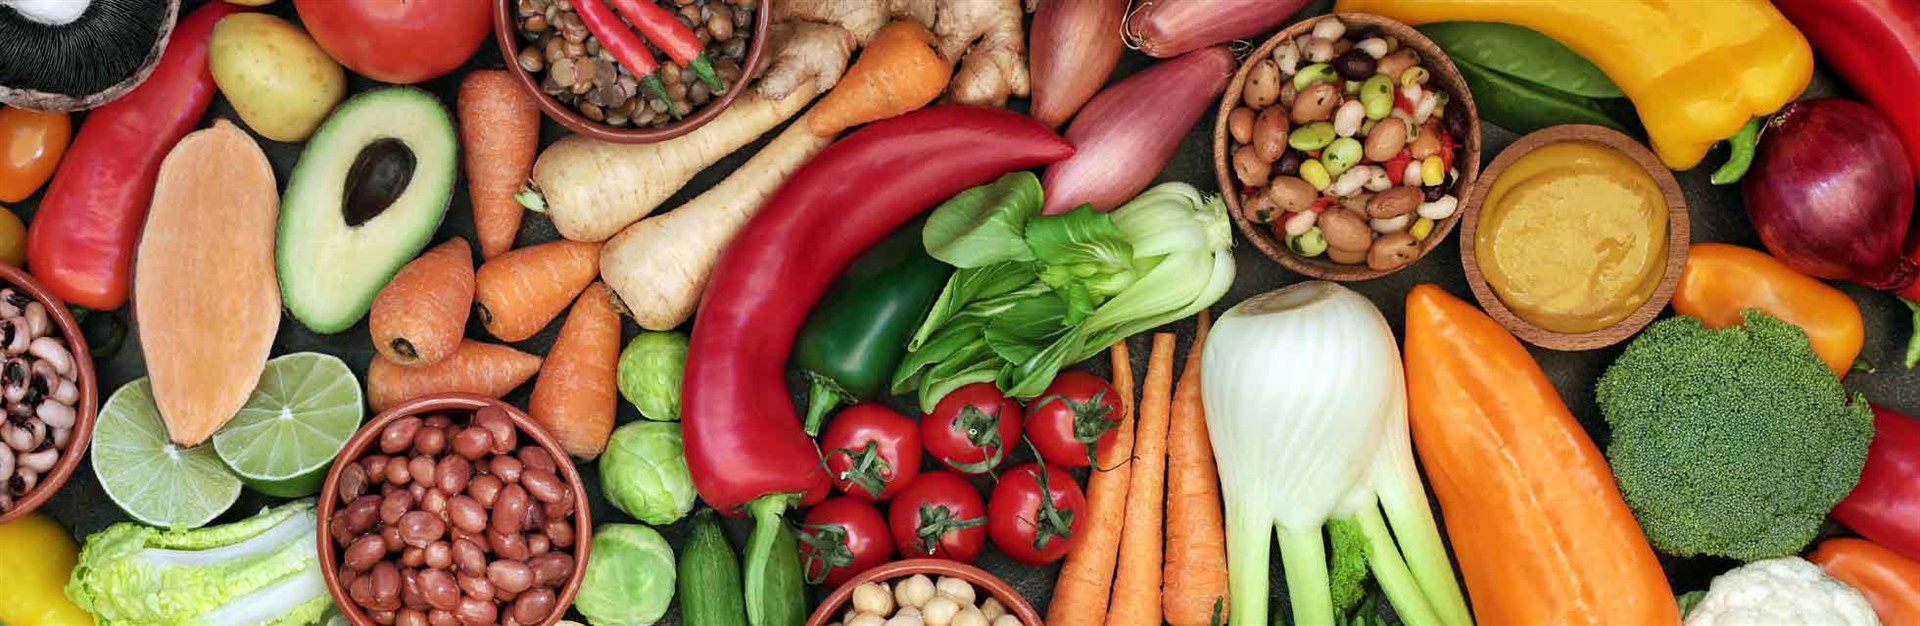 An overhead photo of a range of colourful vegetables and nuts, including carrots, peppers, potatoes and avocados